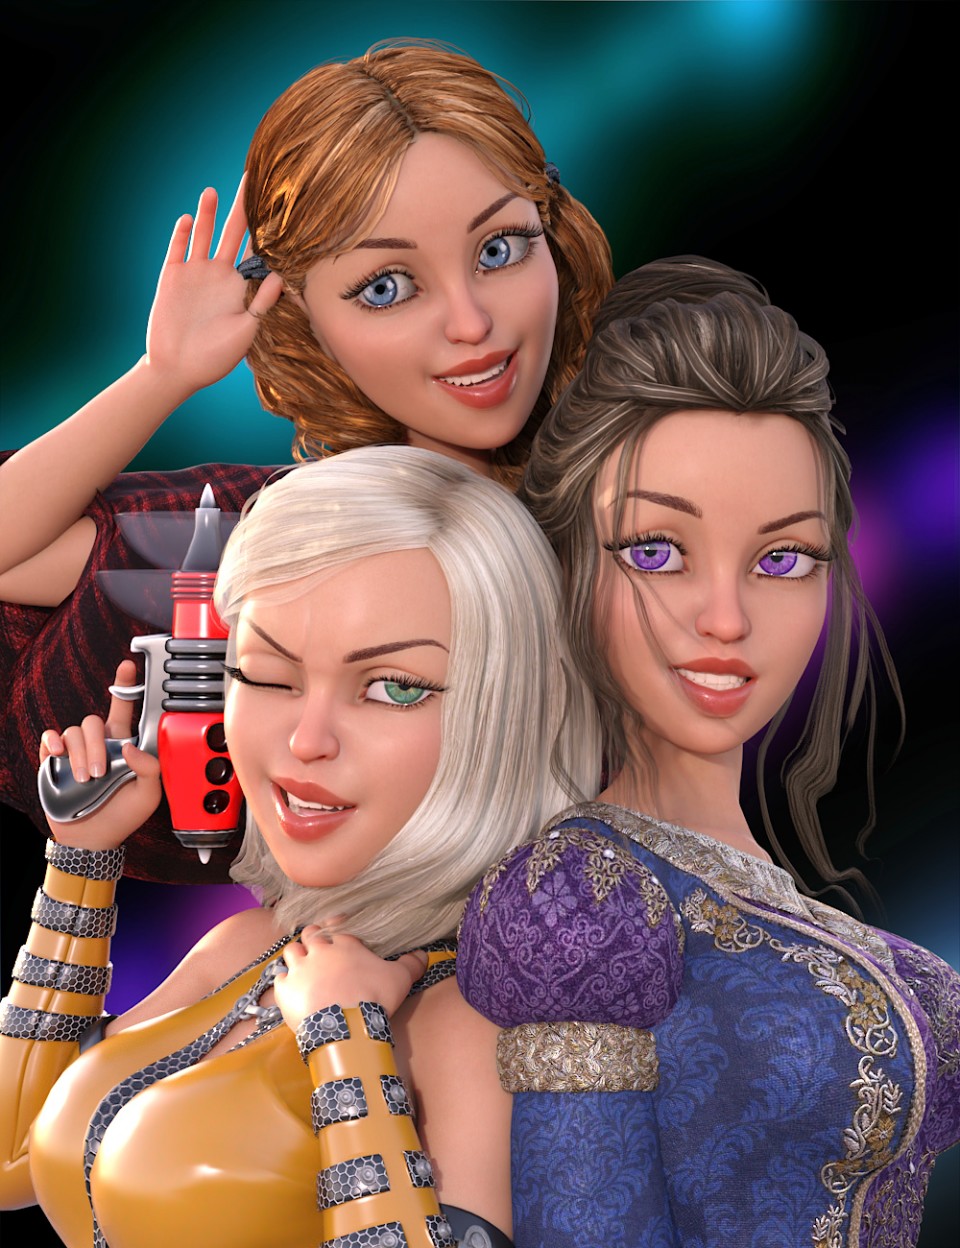 TOON GIRLS Expressions for The Girl 8_DAZ3D下载站